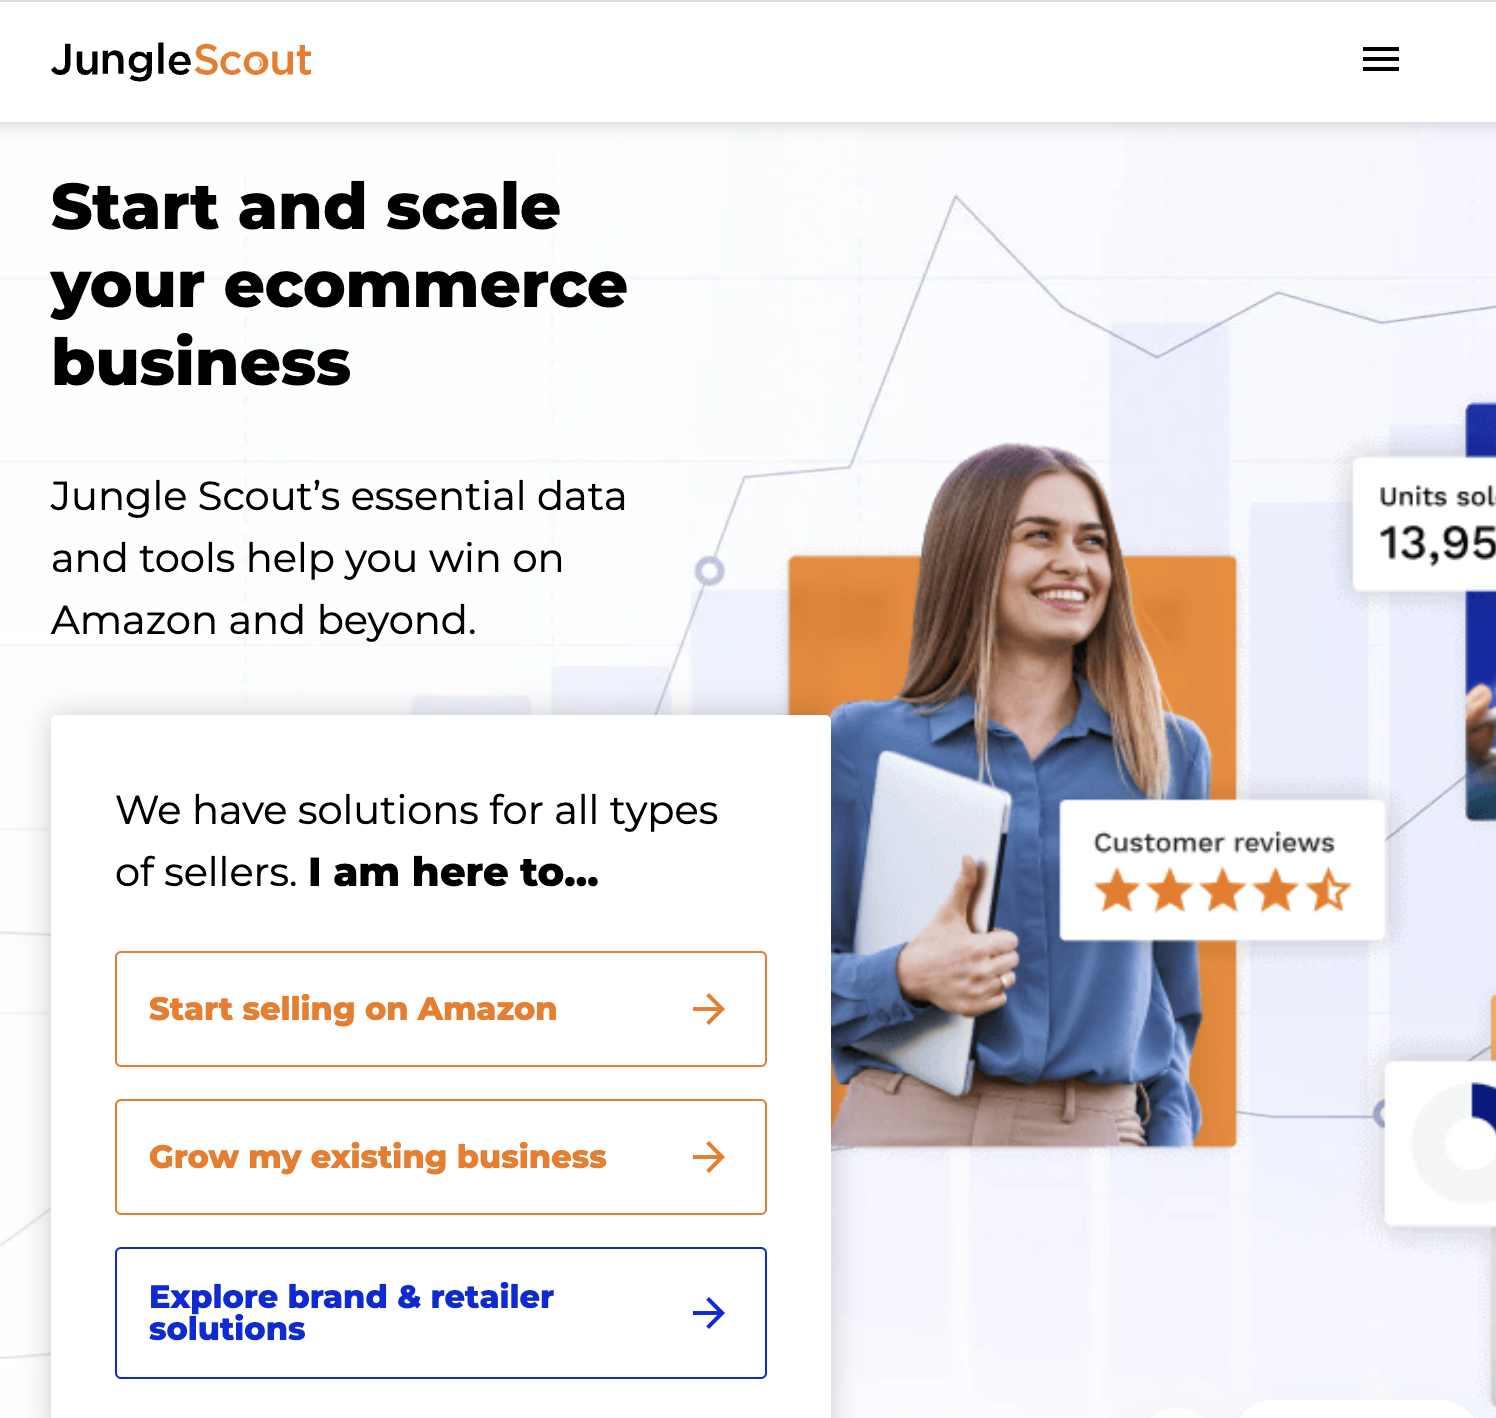 Jungle Scout website with "Start and scale your ecommerce business" title